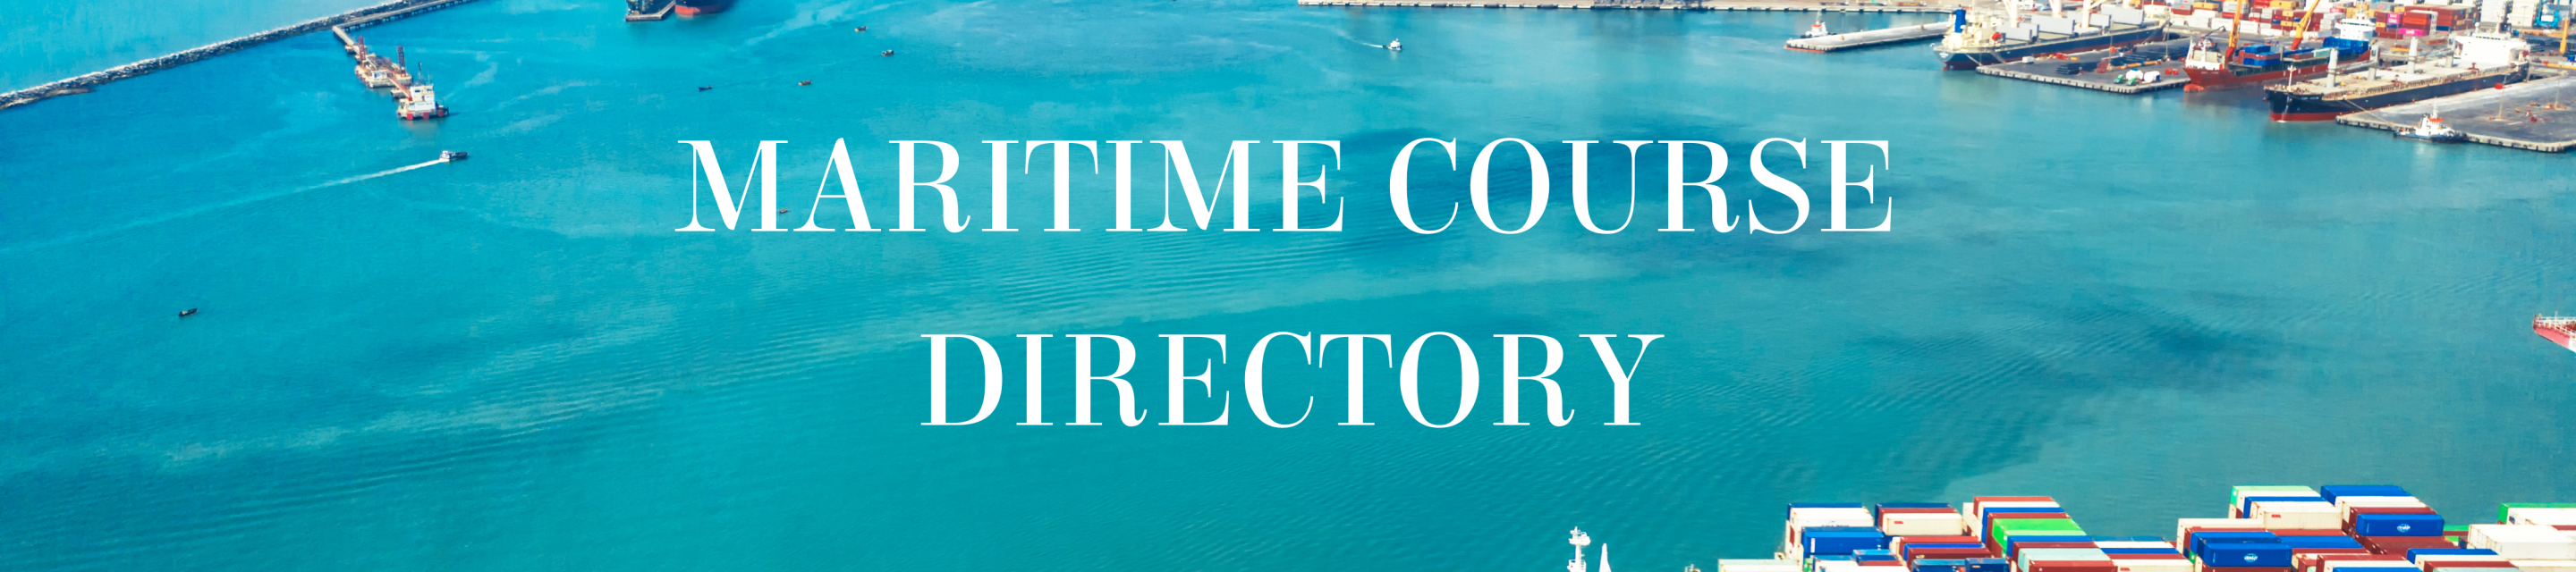 maritime course directory